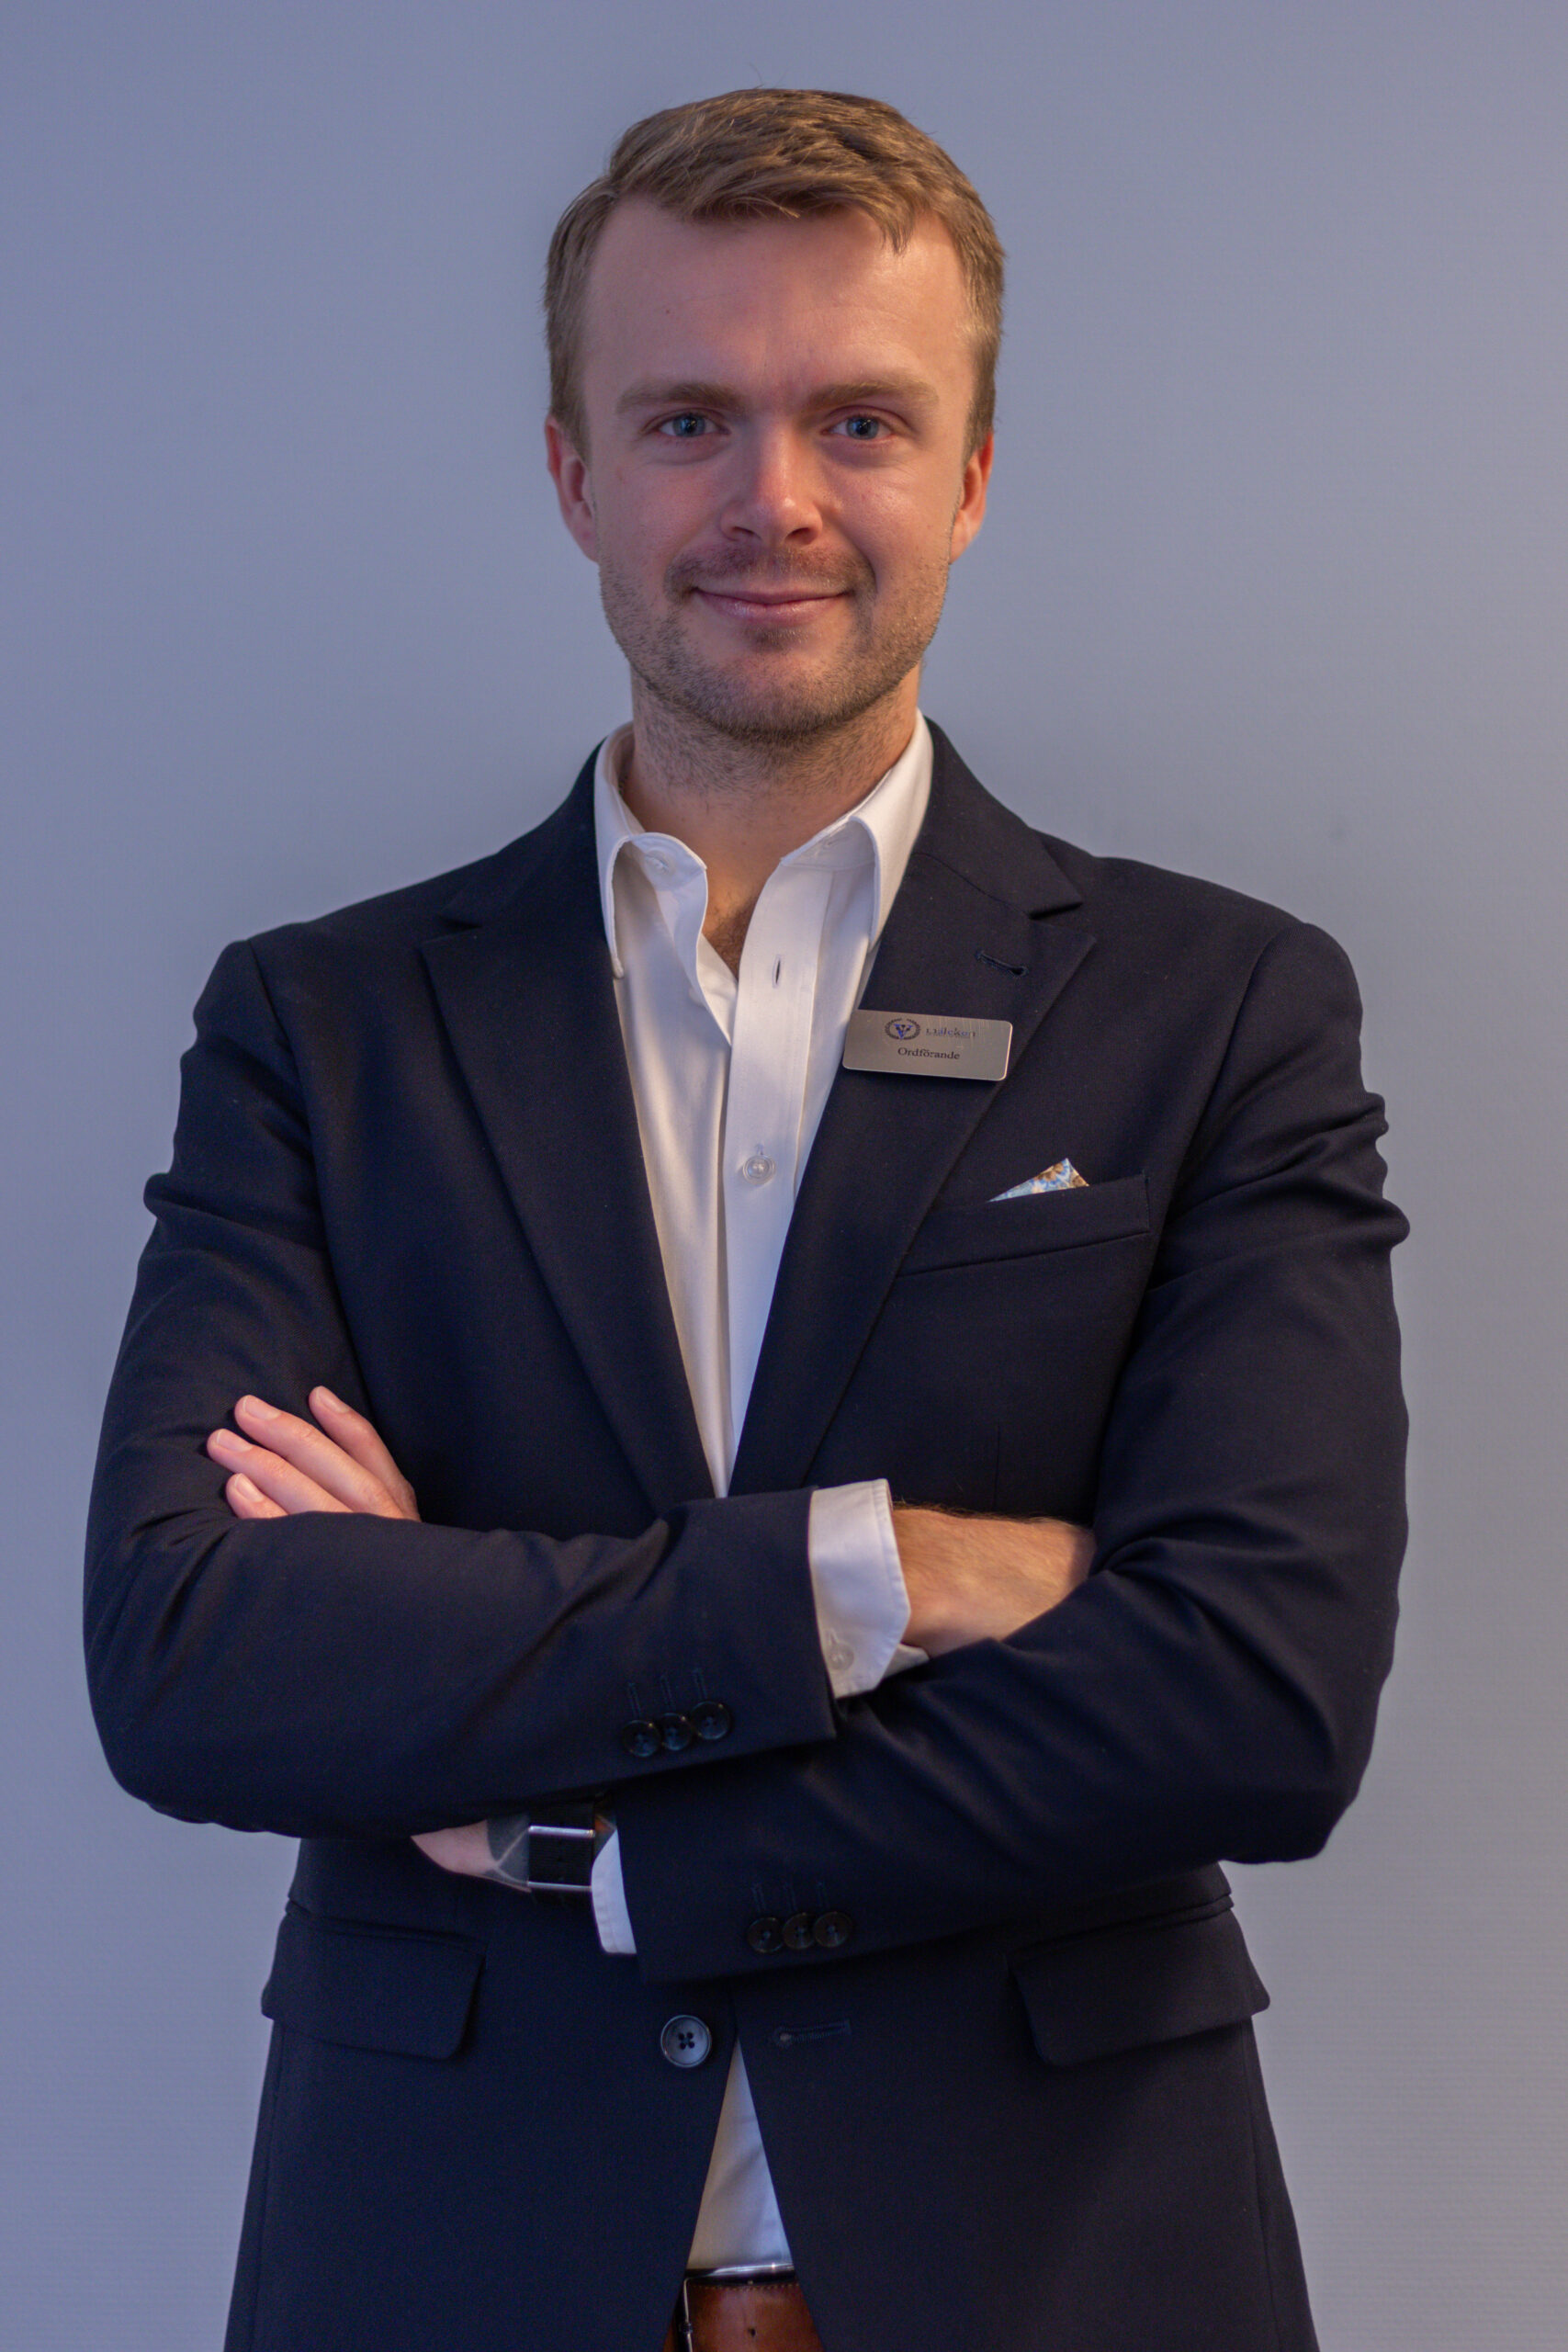 Linus Persson, Chairperson of Mälekon, contributing to the growth and development of the student union through dedicated leadership